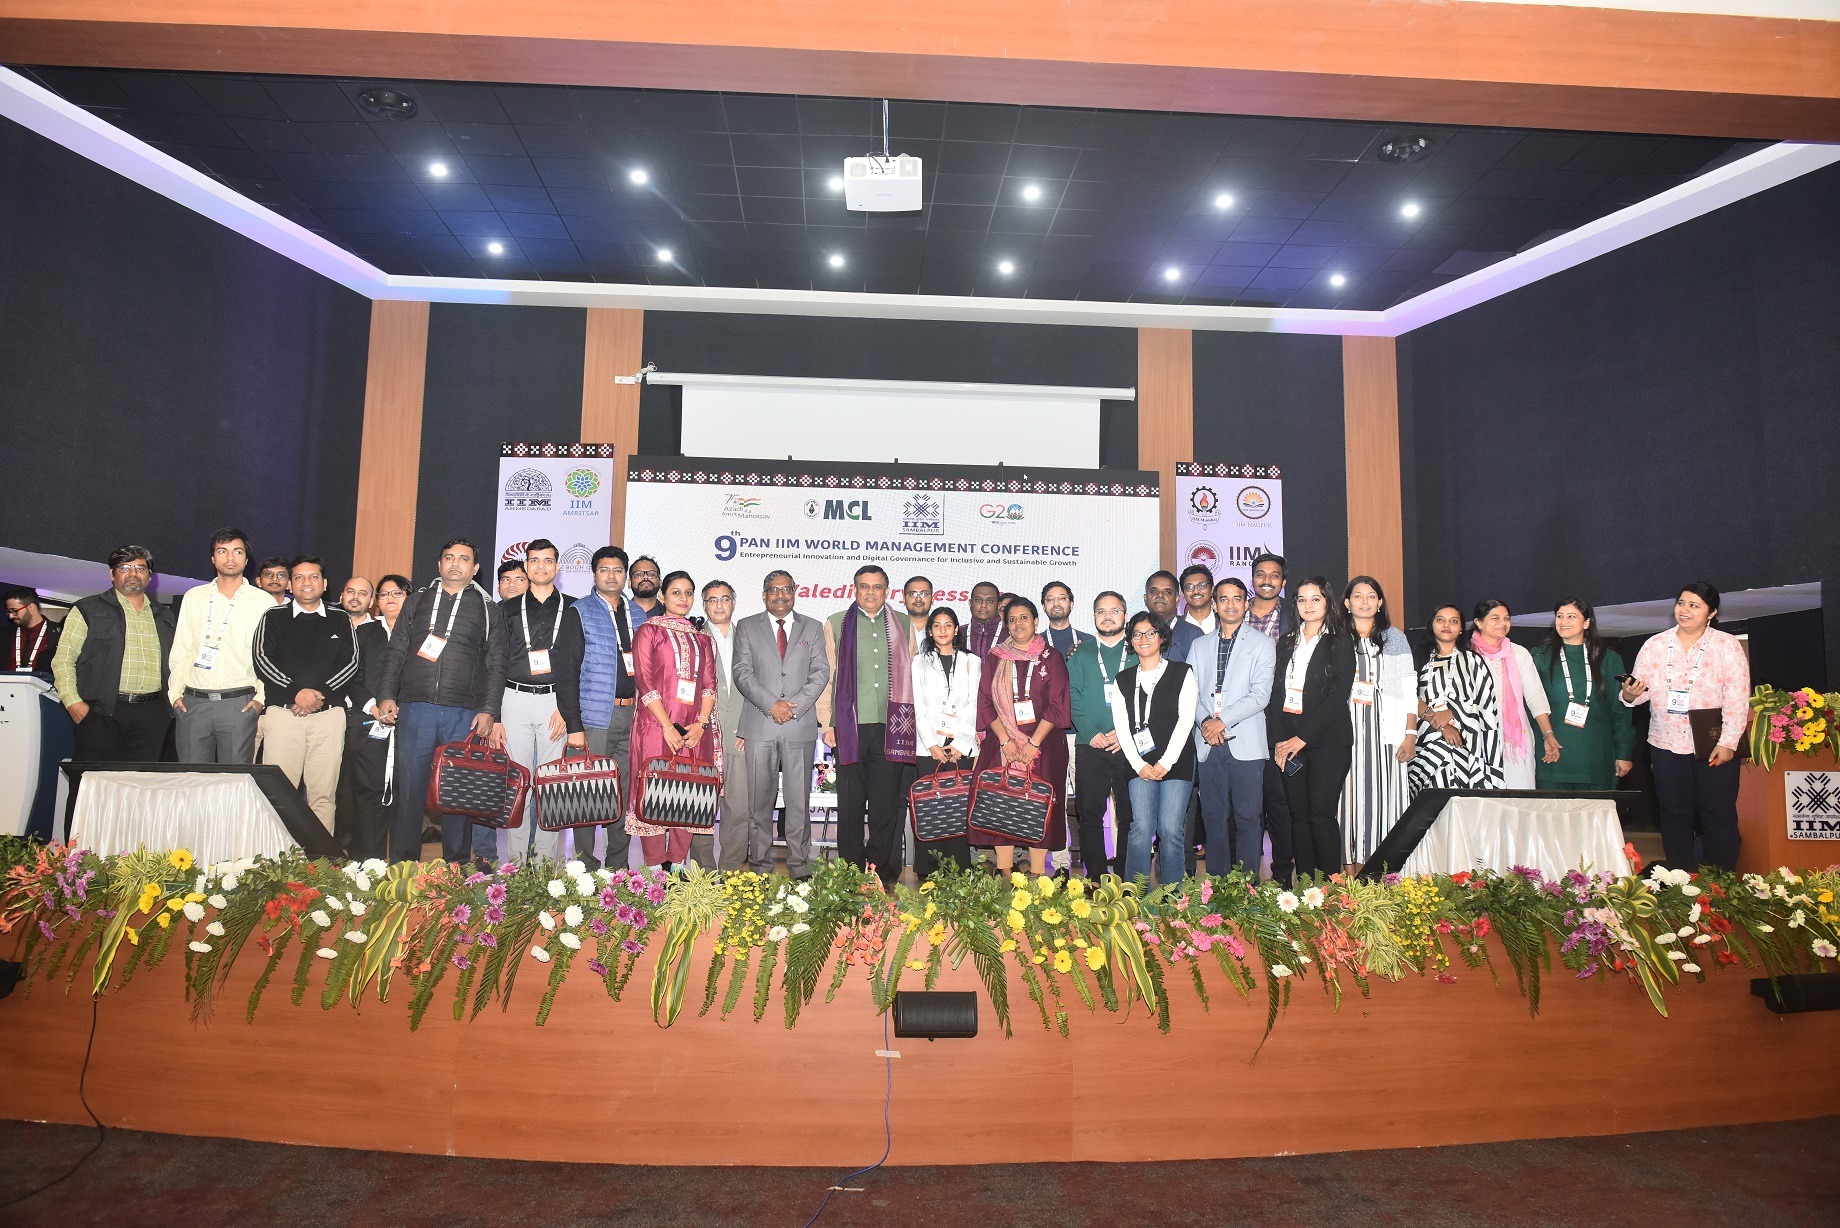 Directors of Prestigious IIMs Illuminate Paths to Enhance Managerial Capacities and Foster Collaboration